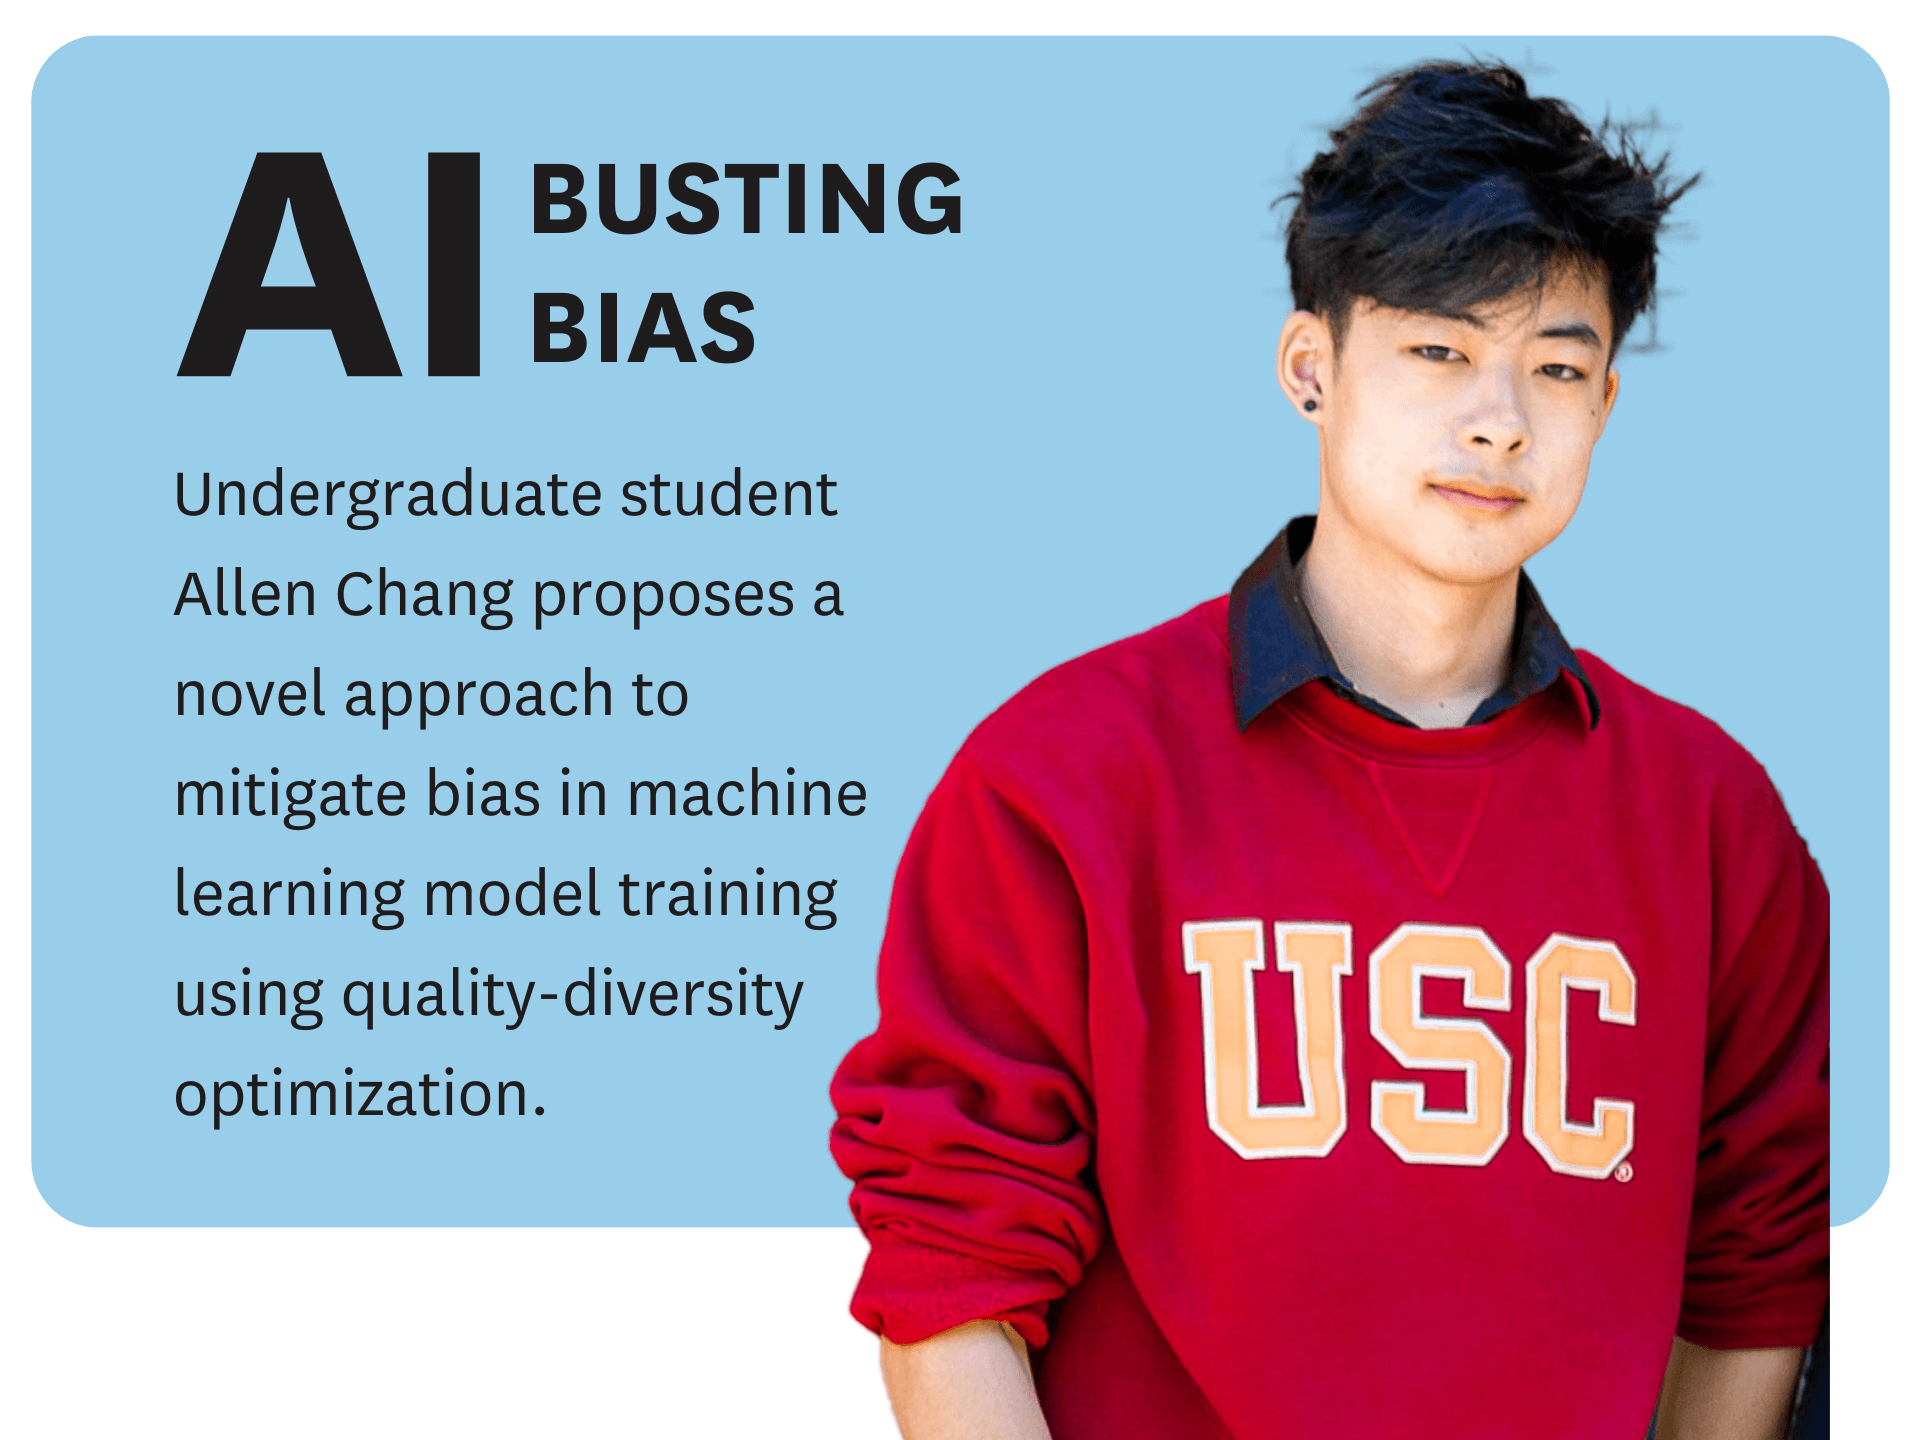 Undergraduate student Allen Chang proposes a novel approach to mitigate bias in machine learning model training using quality-diversity optimization.